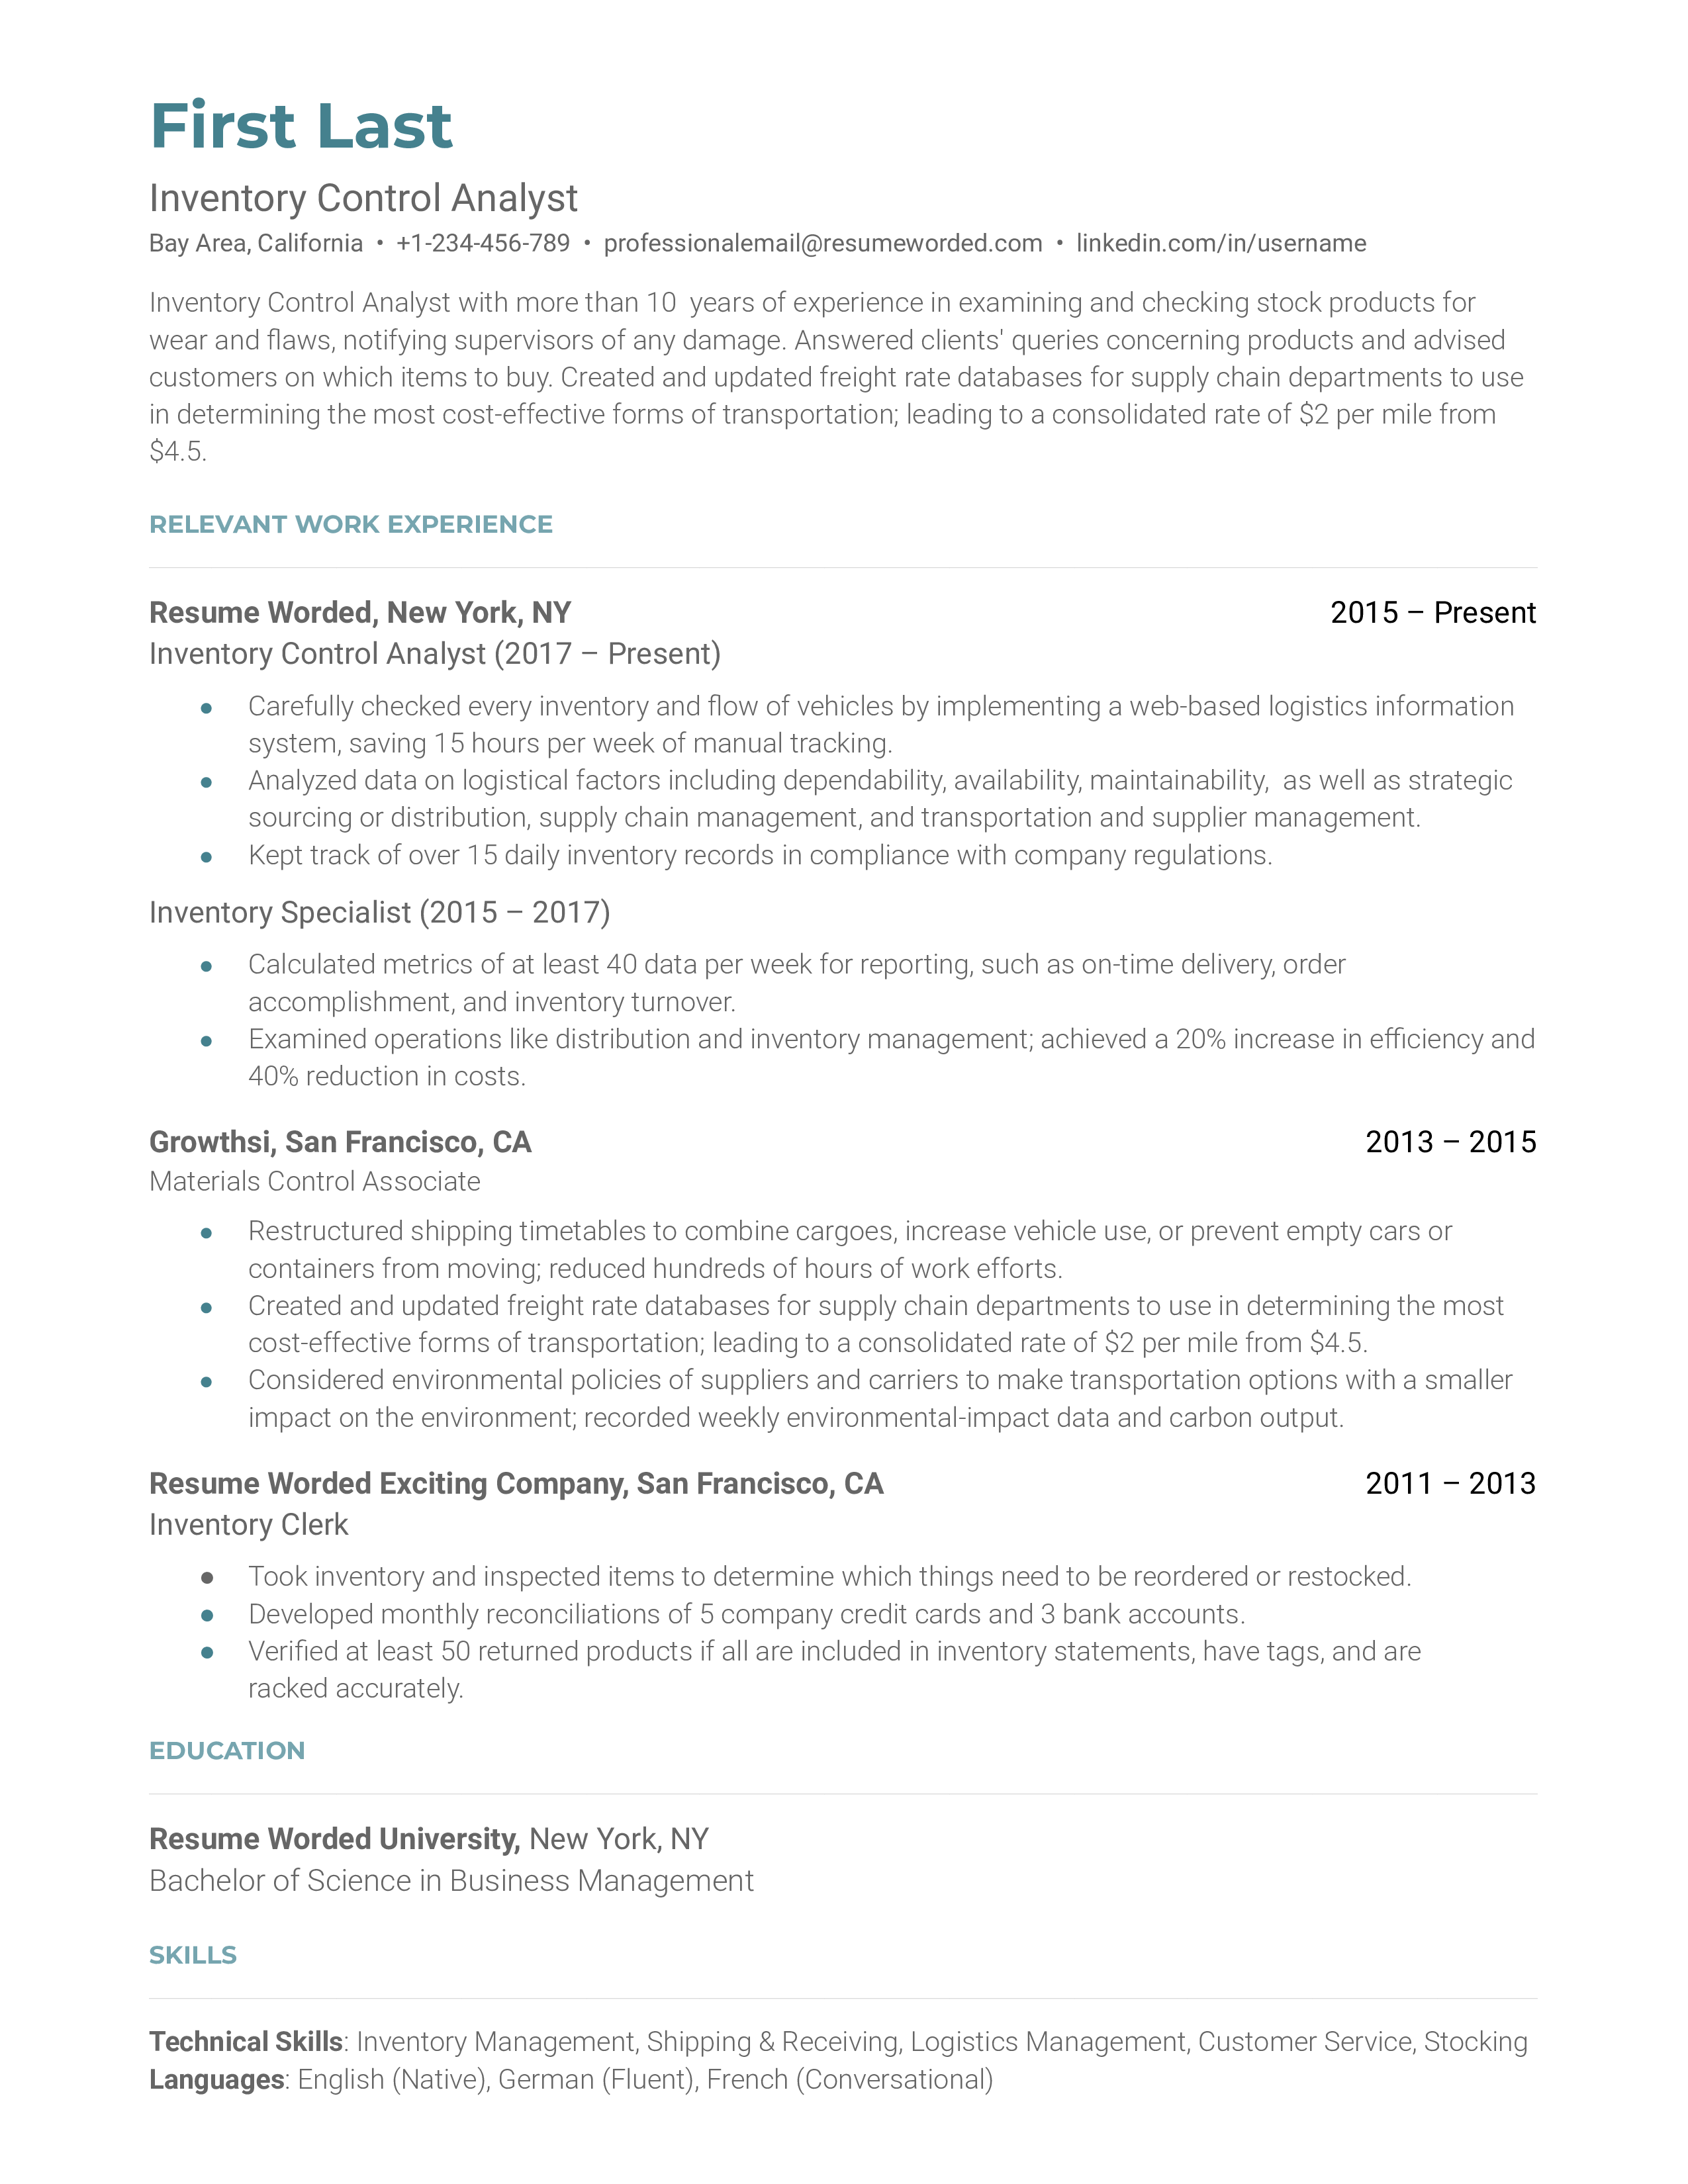 Inventory Control Analyst Resume Sample